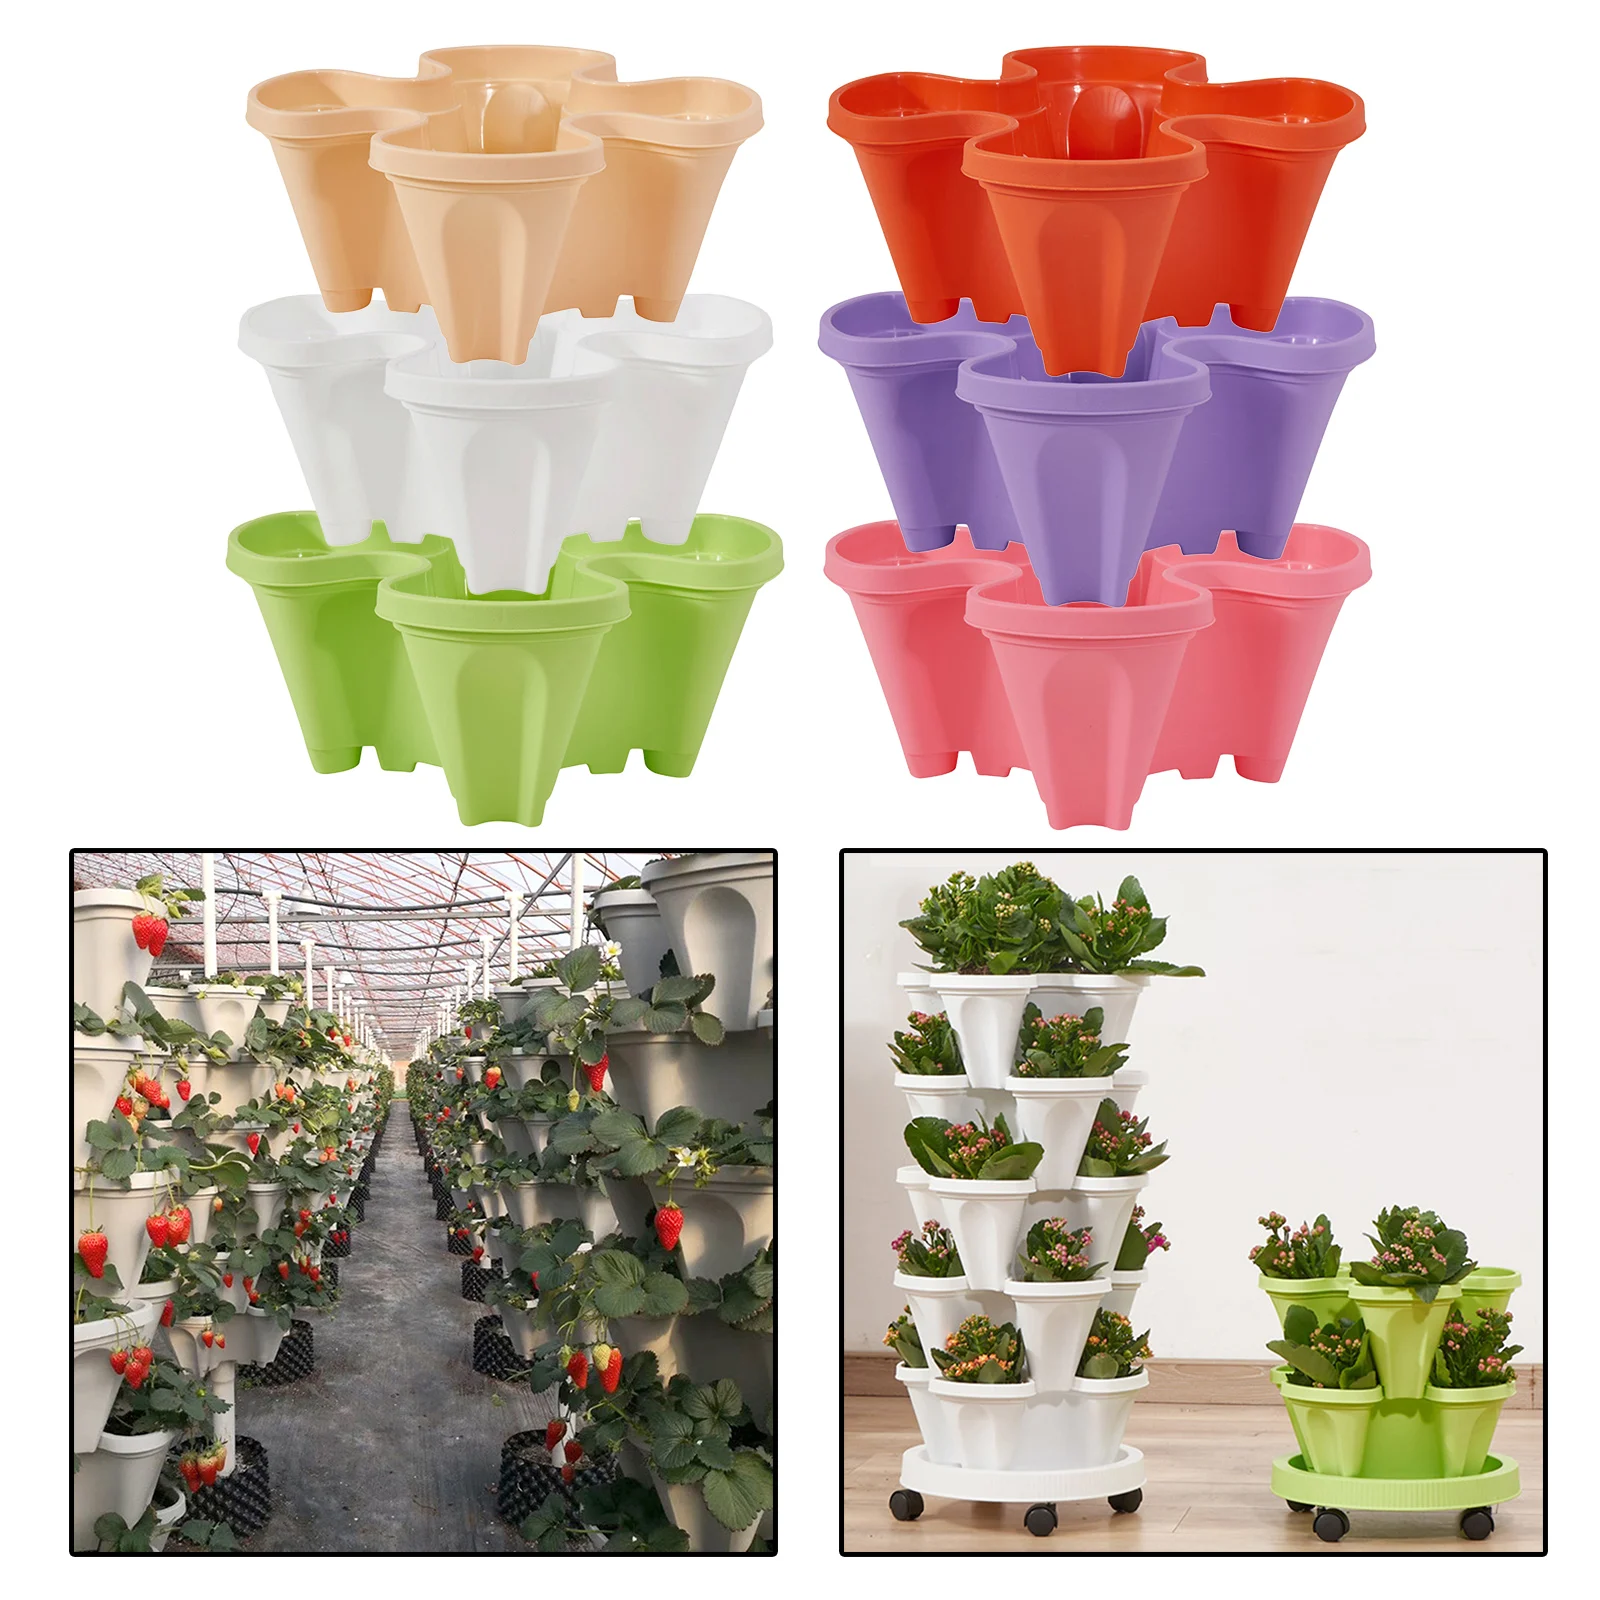 Details about   Stackable Vertical Planter Flower Pot For Garden Balcony Home Wall Hanging Mgic 